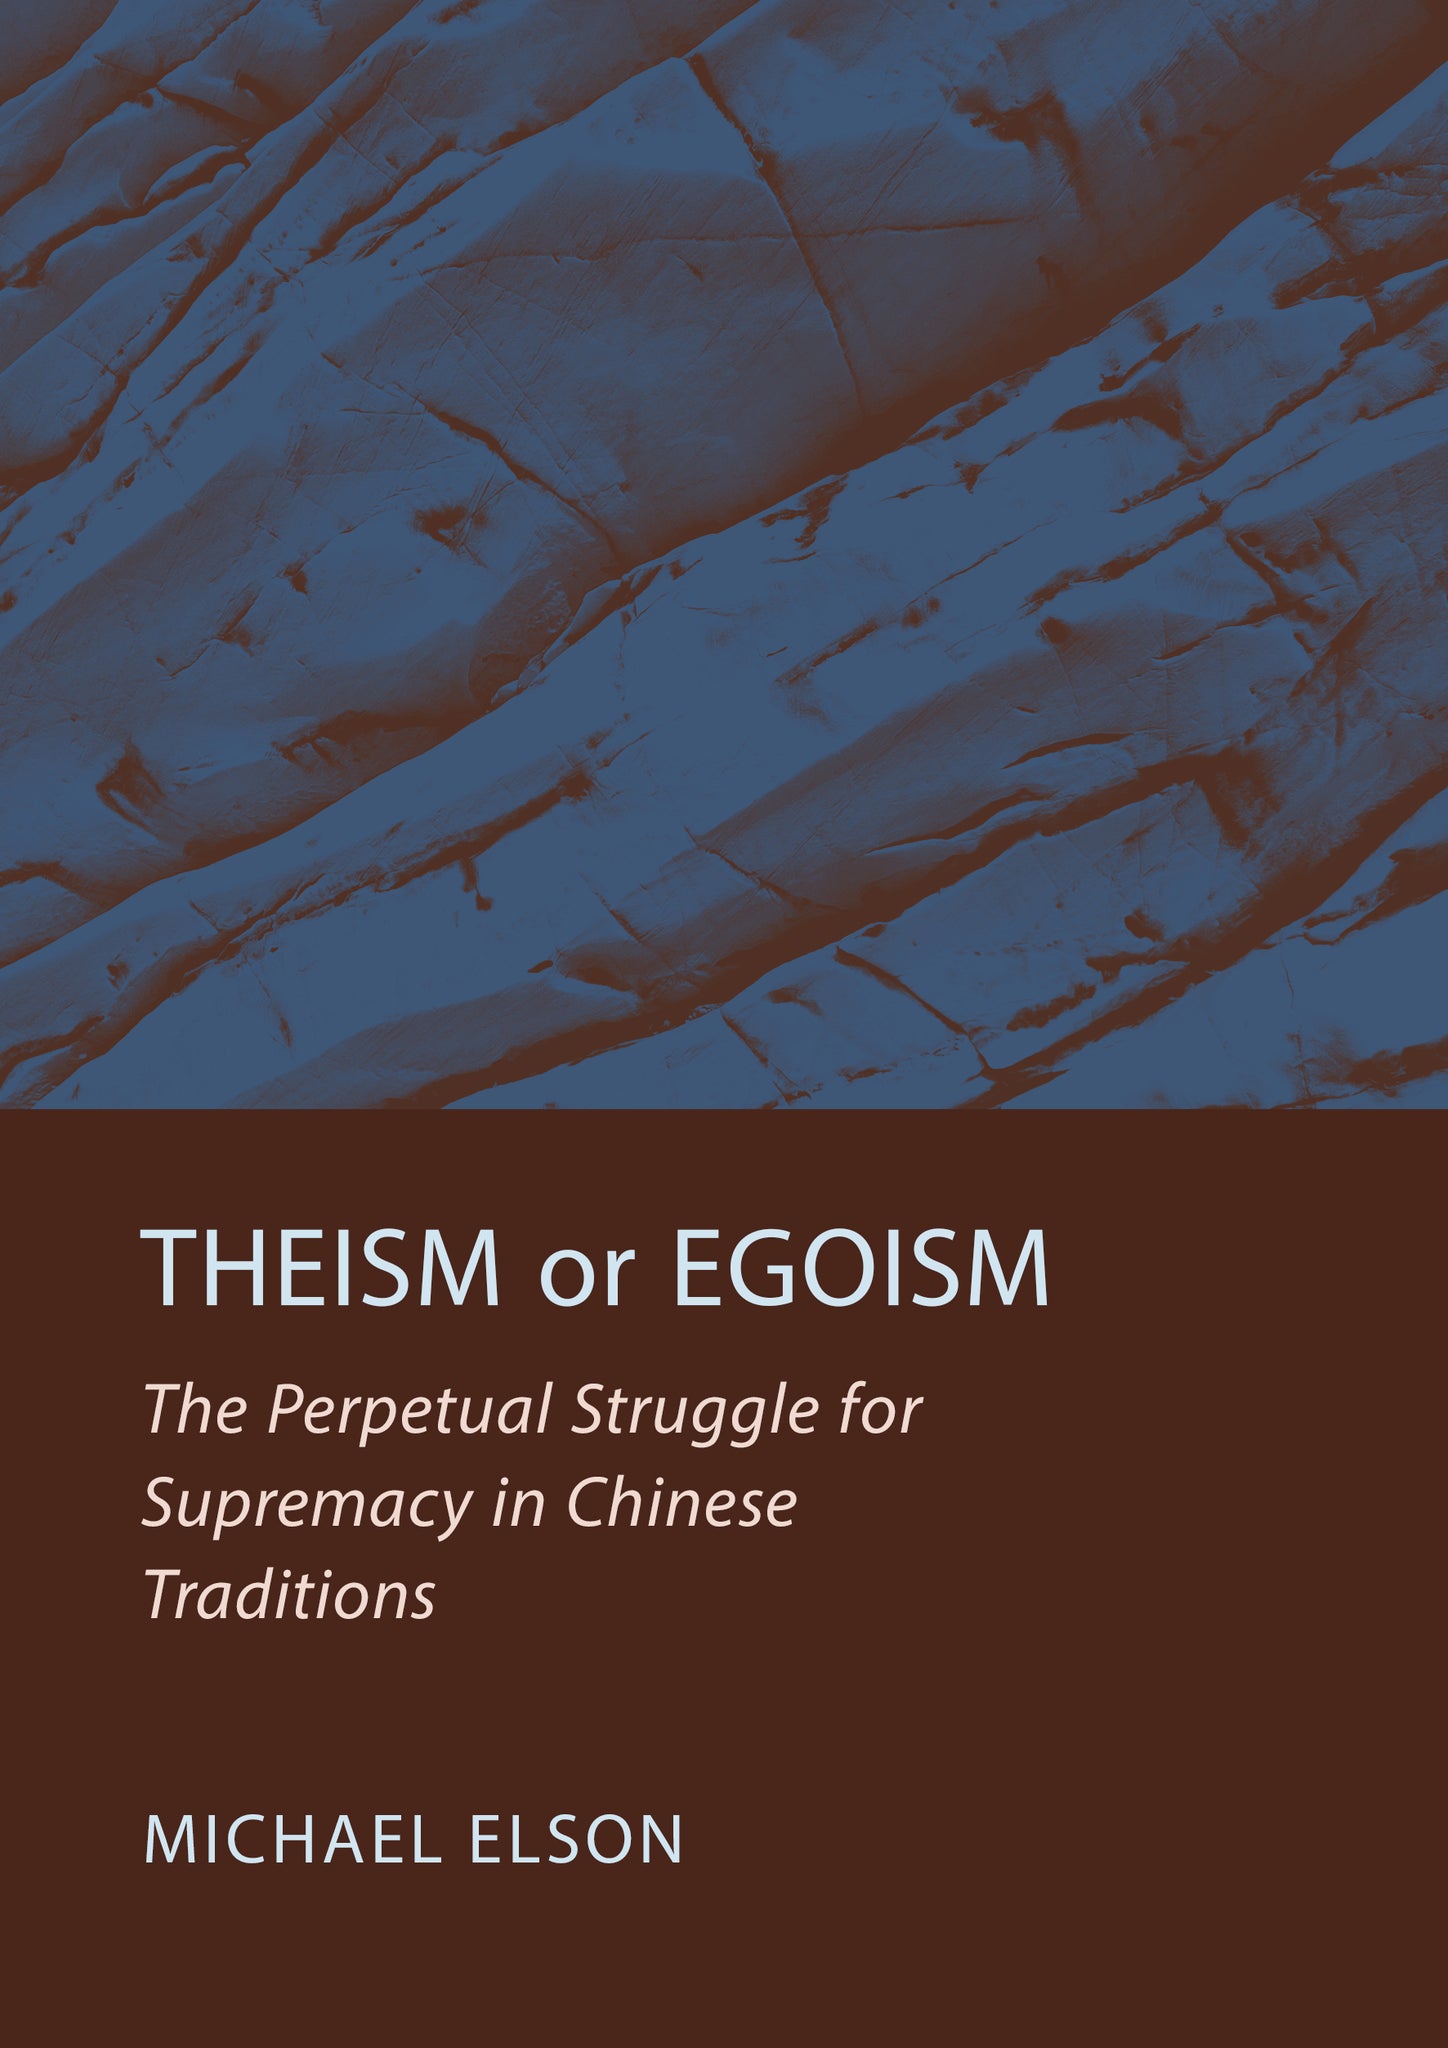 Theism or Egoism: The Perpetual Struggle for Supremacy in Chinese Traditions